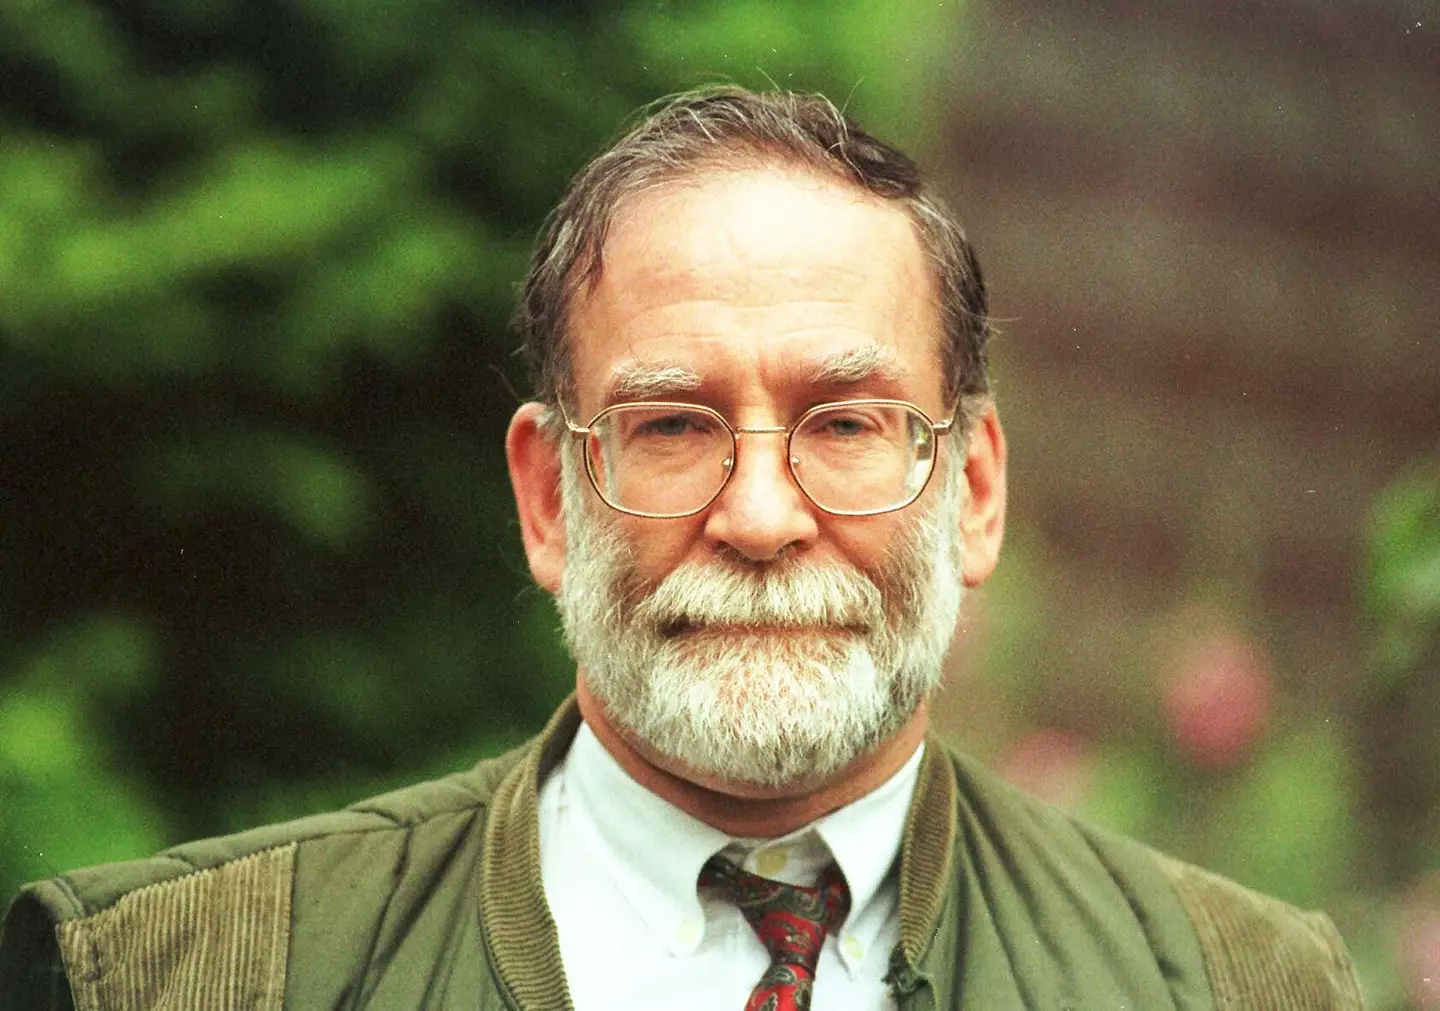 Harold Shipman is believed to have killed hundreds over the course of two decades before his 1998 arrest.